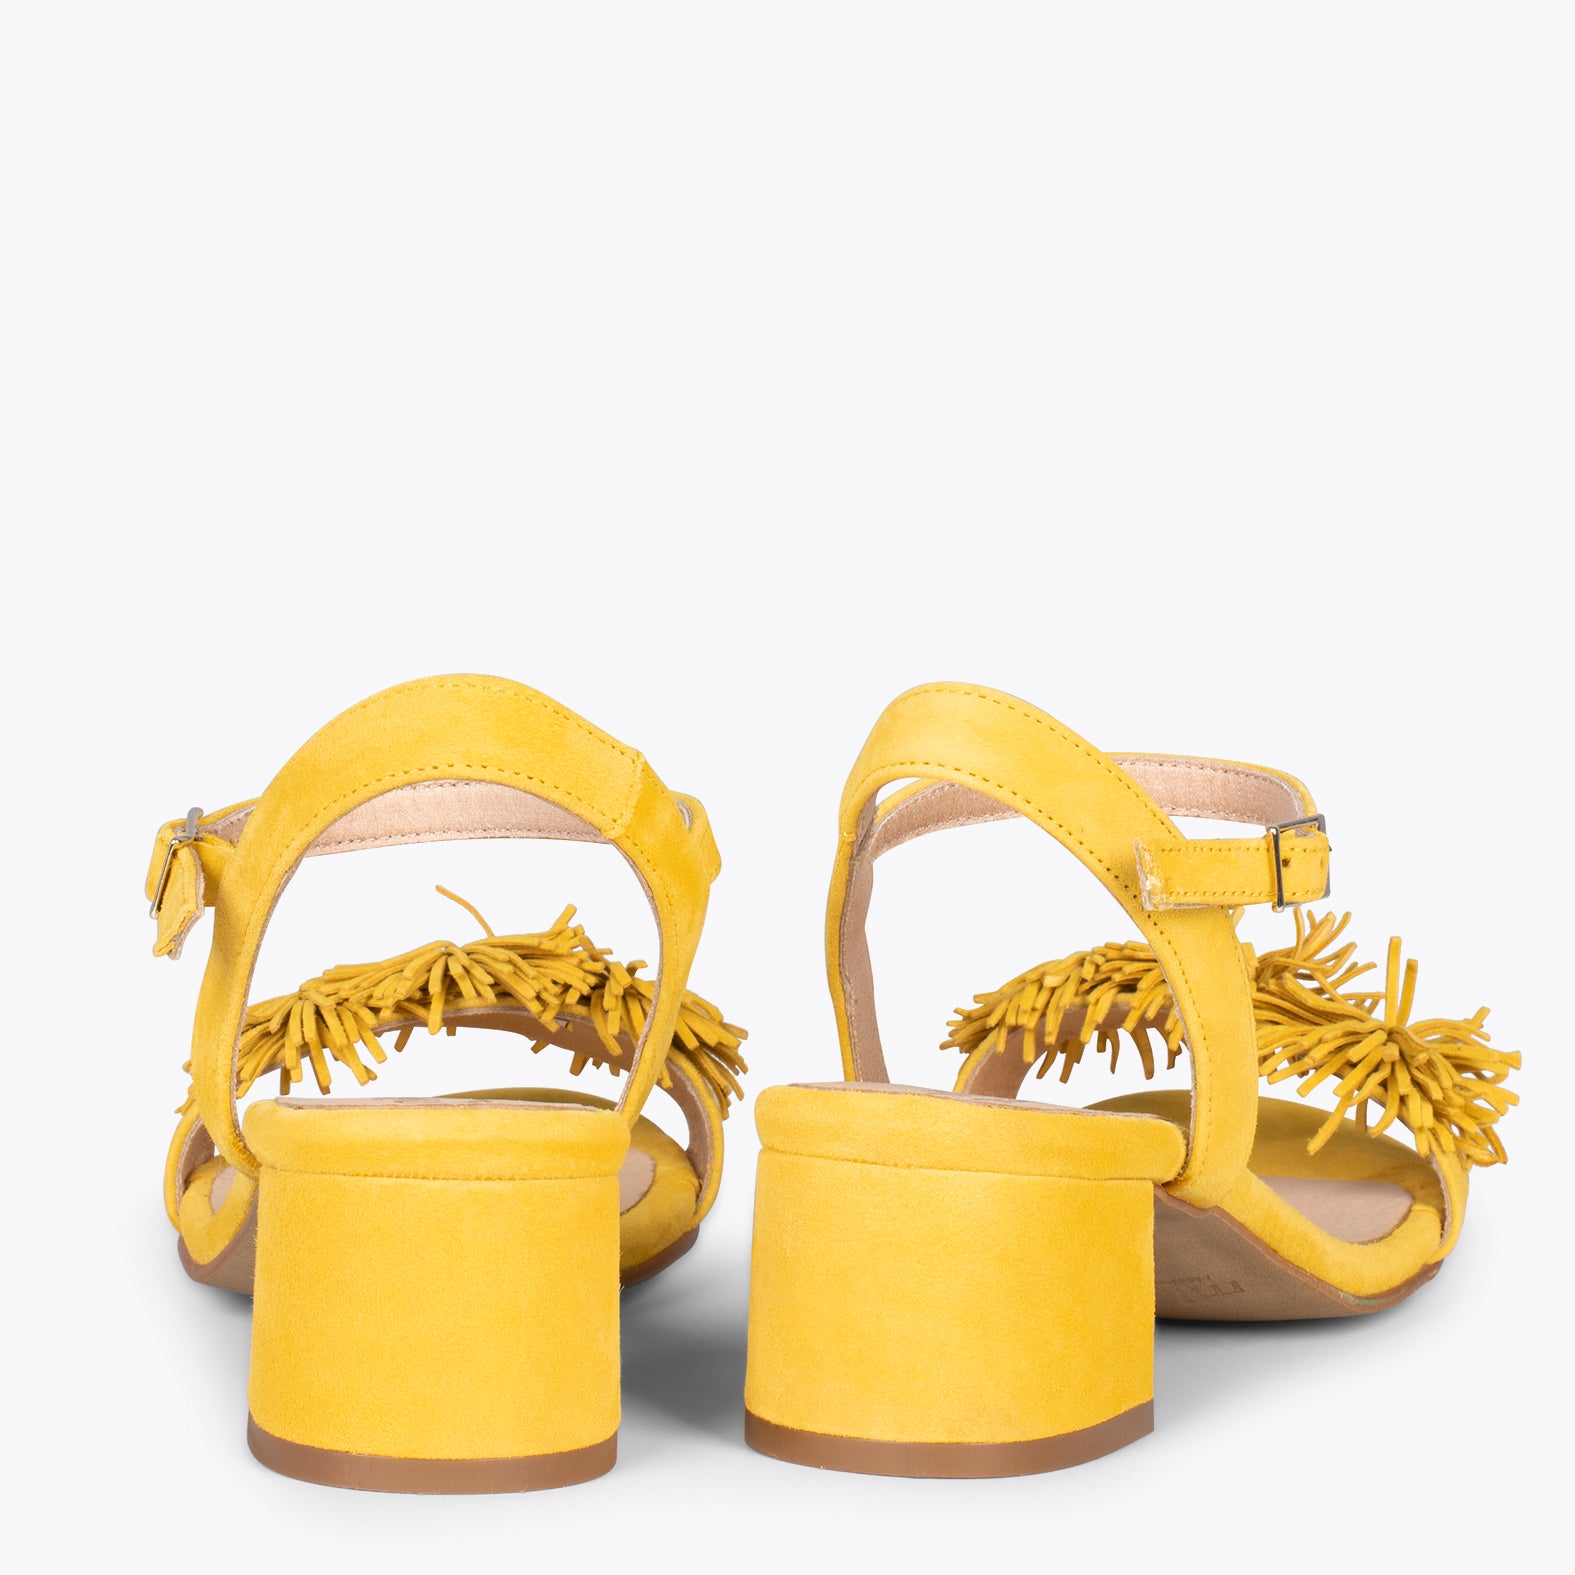 ZINNIA – YELLOW sandals with pompom details